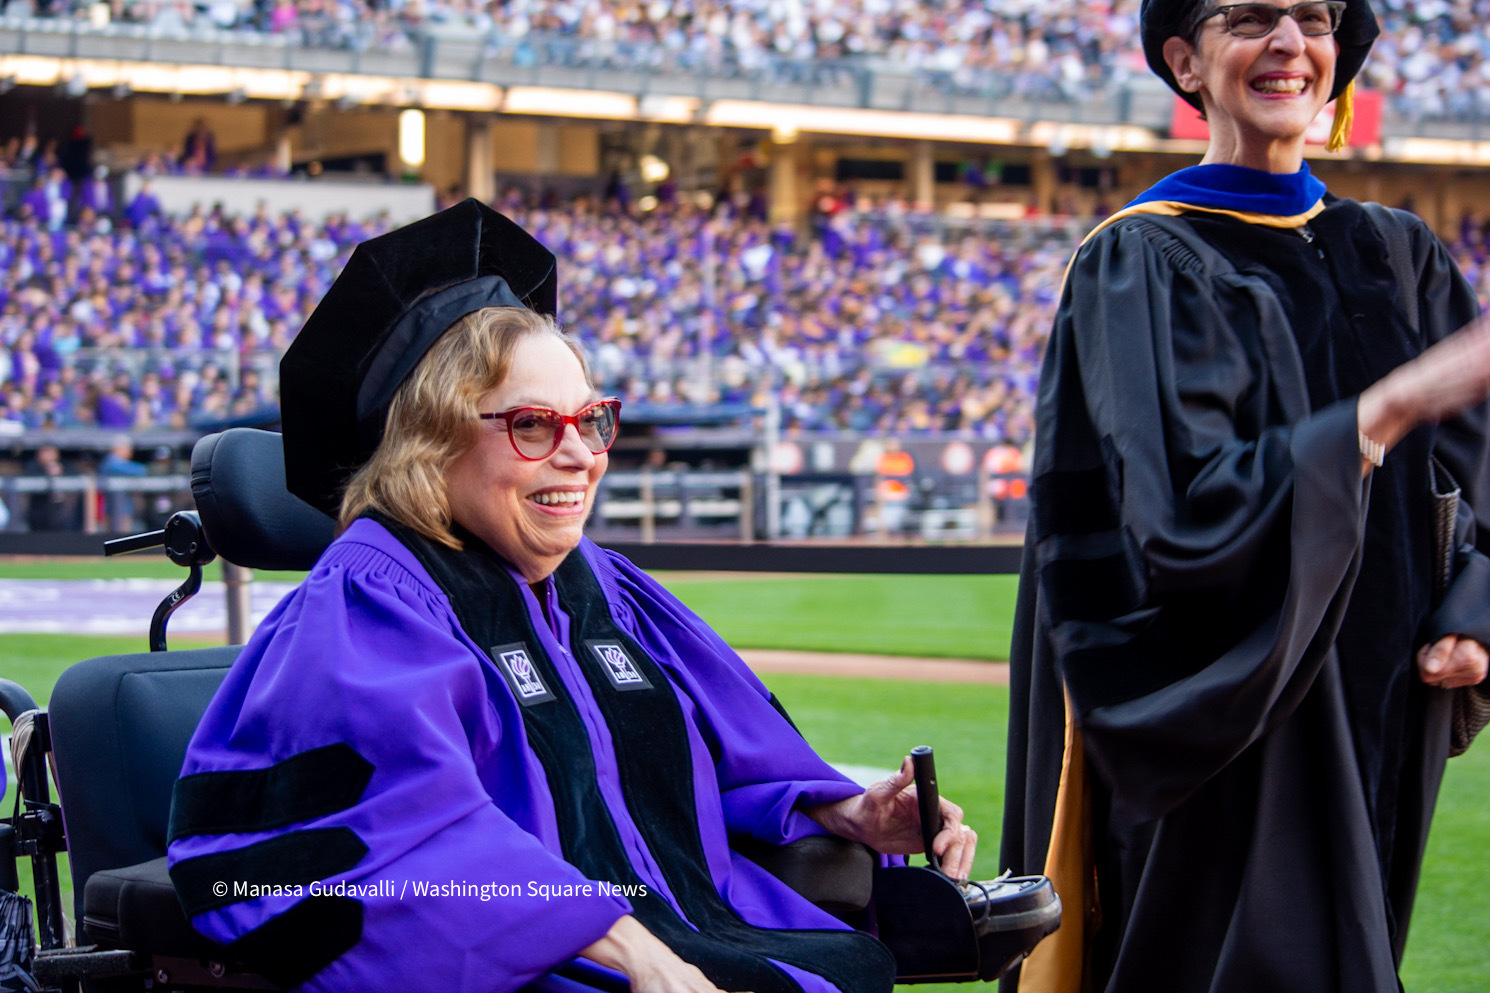 Judith Heumann, wearing violet academic robes and red spectacles, enters Yankee Stadium during NYU's commencement ceremony for the classes of 2020 and 2021. She smiles and controls her wheelchair with one hand. Faye Ginsburg is on her left, wearing a black robe and smiling. A crowd of graduates are in the stands in the background.